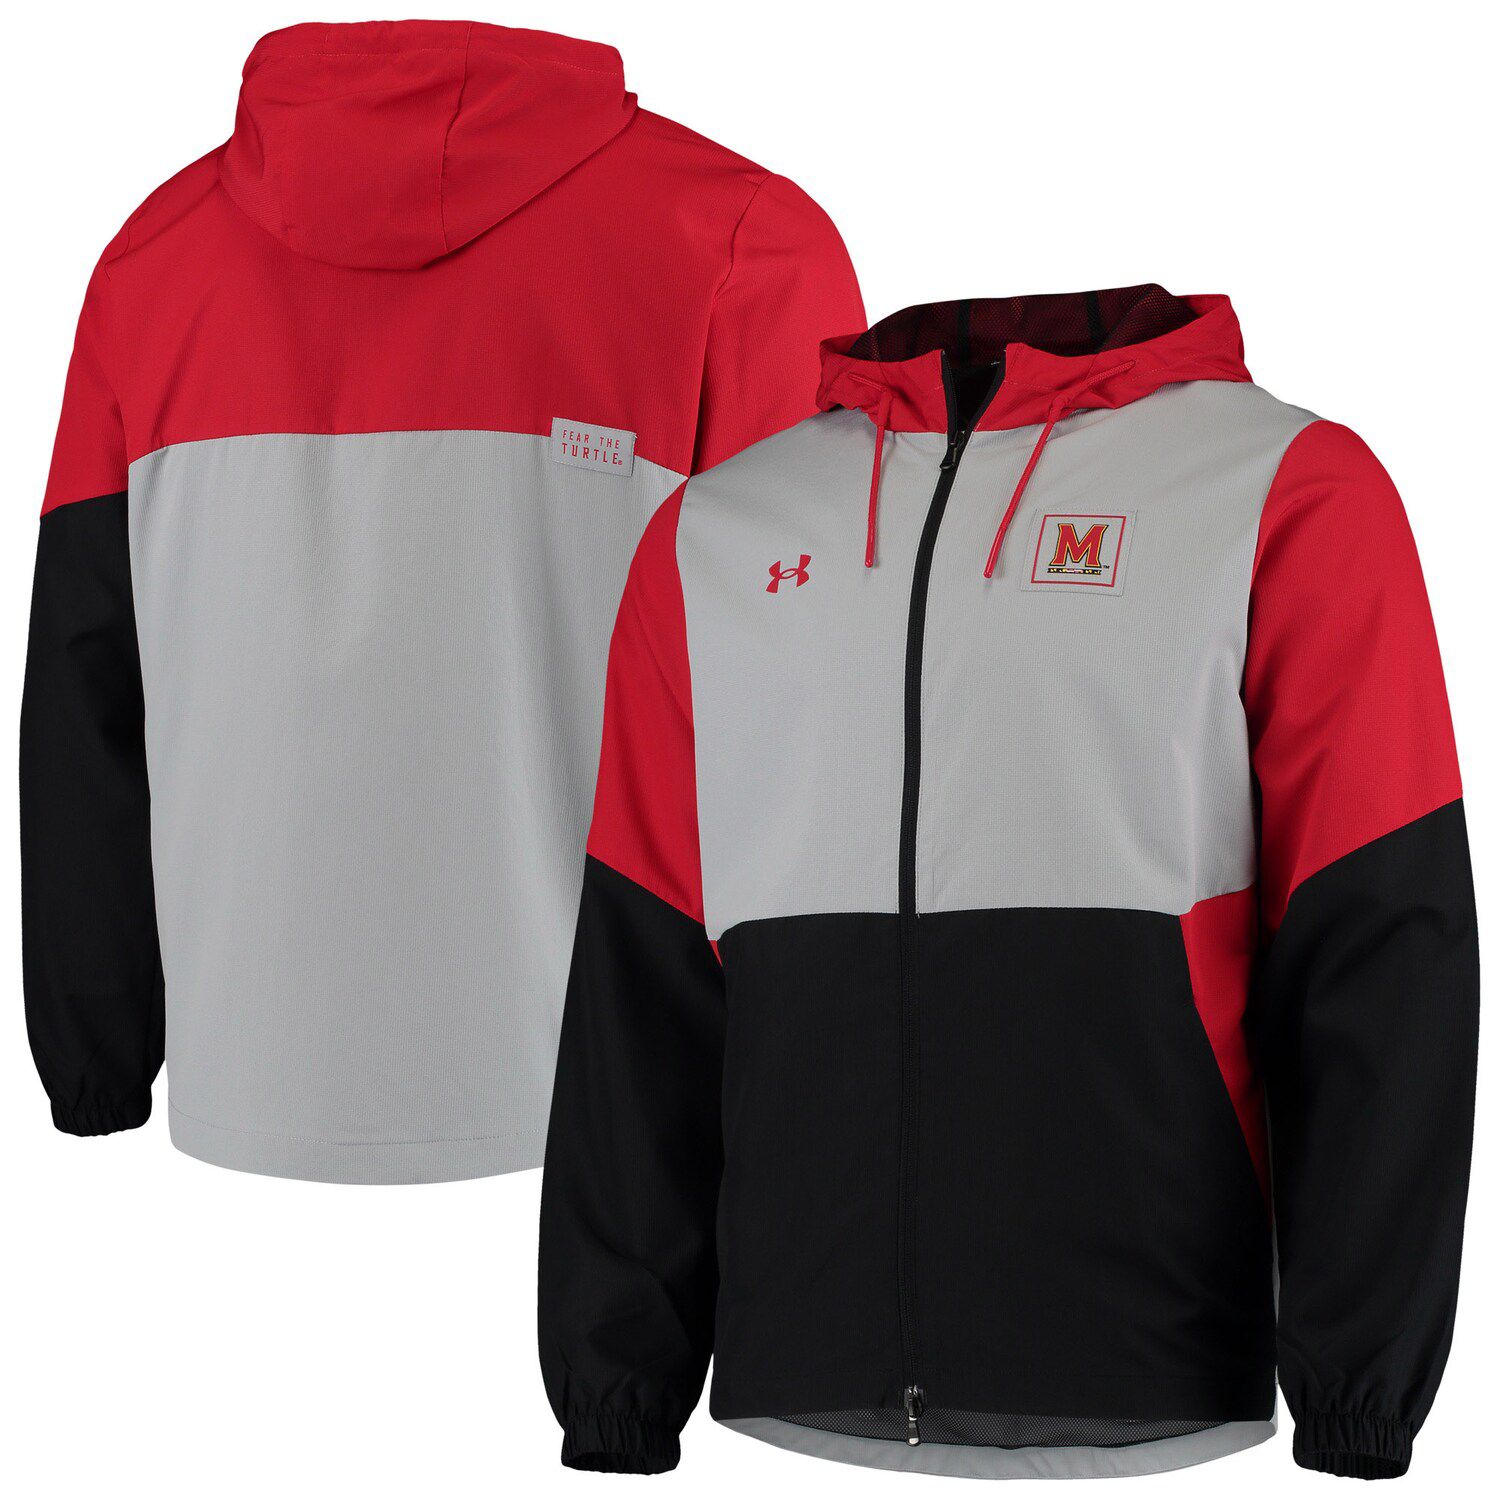 kohl's under armour mens jacket